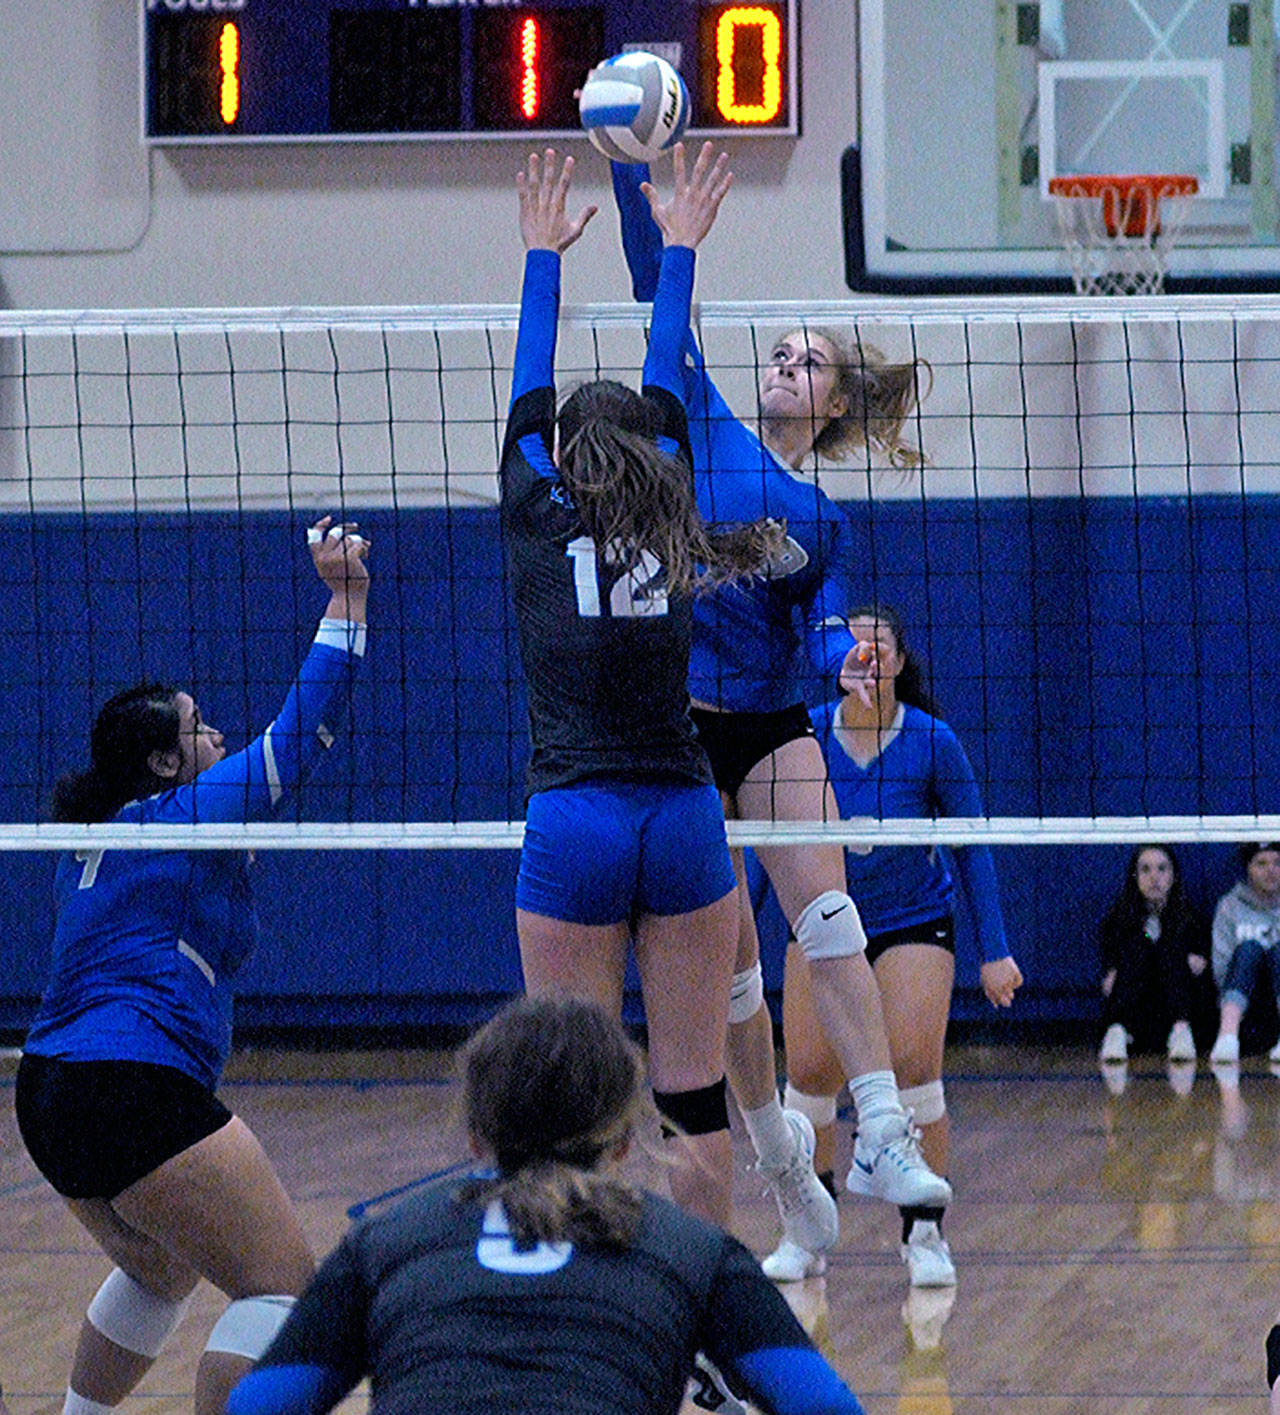 Grays Harbor College’s Savanah Davis gets a kill in the second set against South Puget Sound on Wednesday. Davis led the team with eight kills. (Hasani Grayson | Grays Harbor News Group)